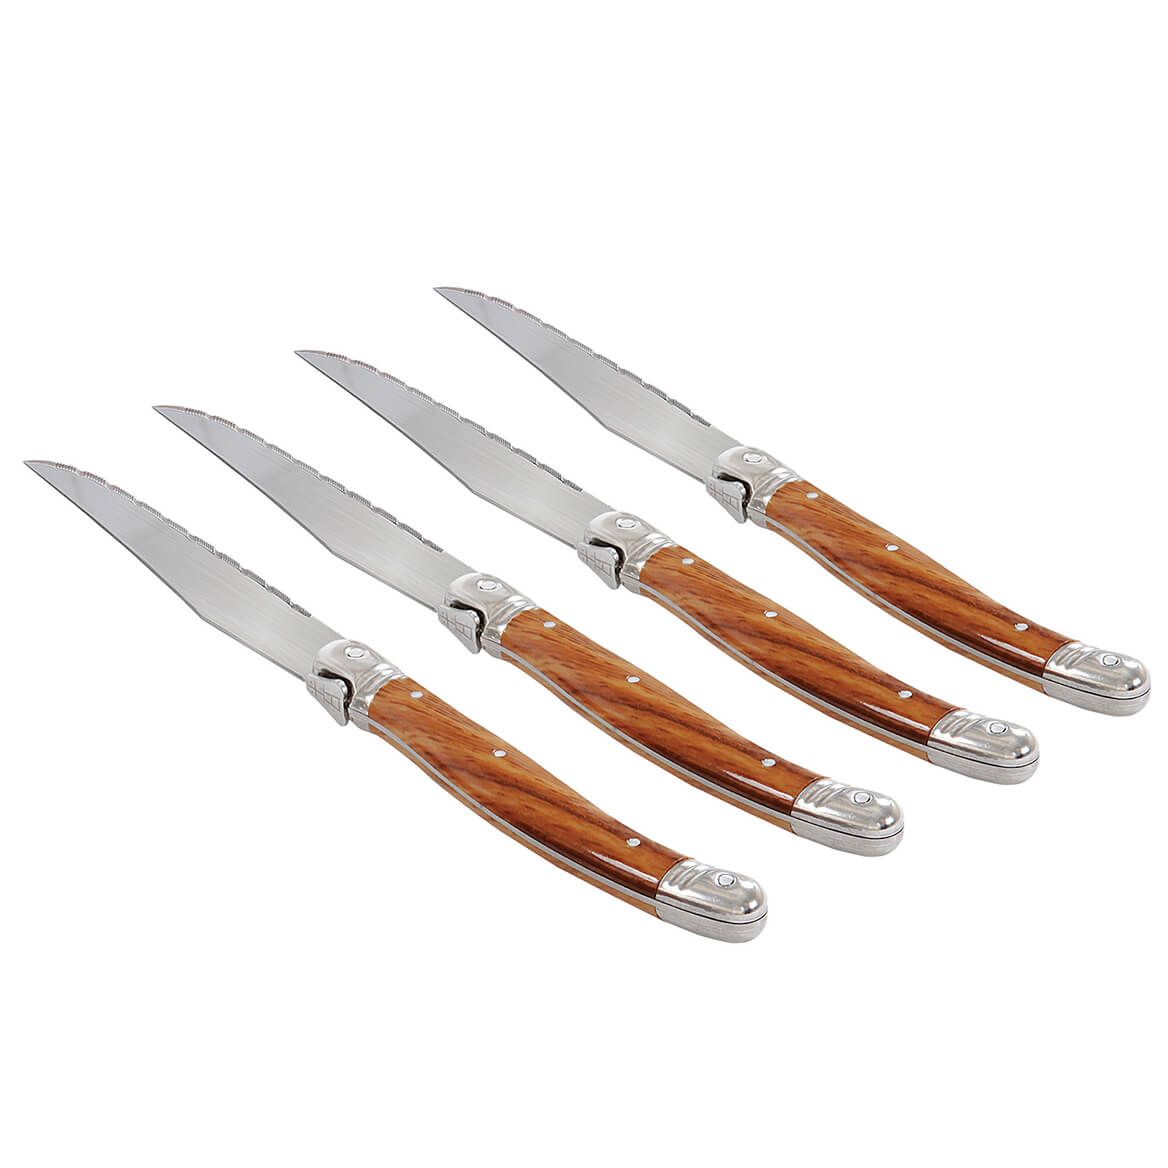 French Style Steak Knives + '-' + 369713